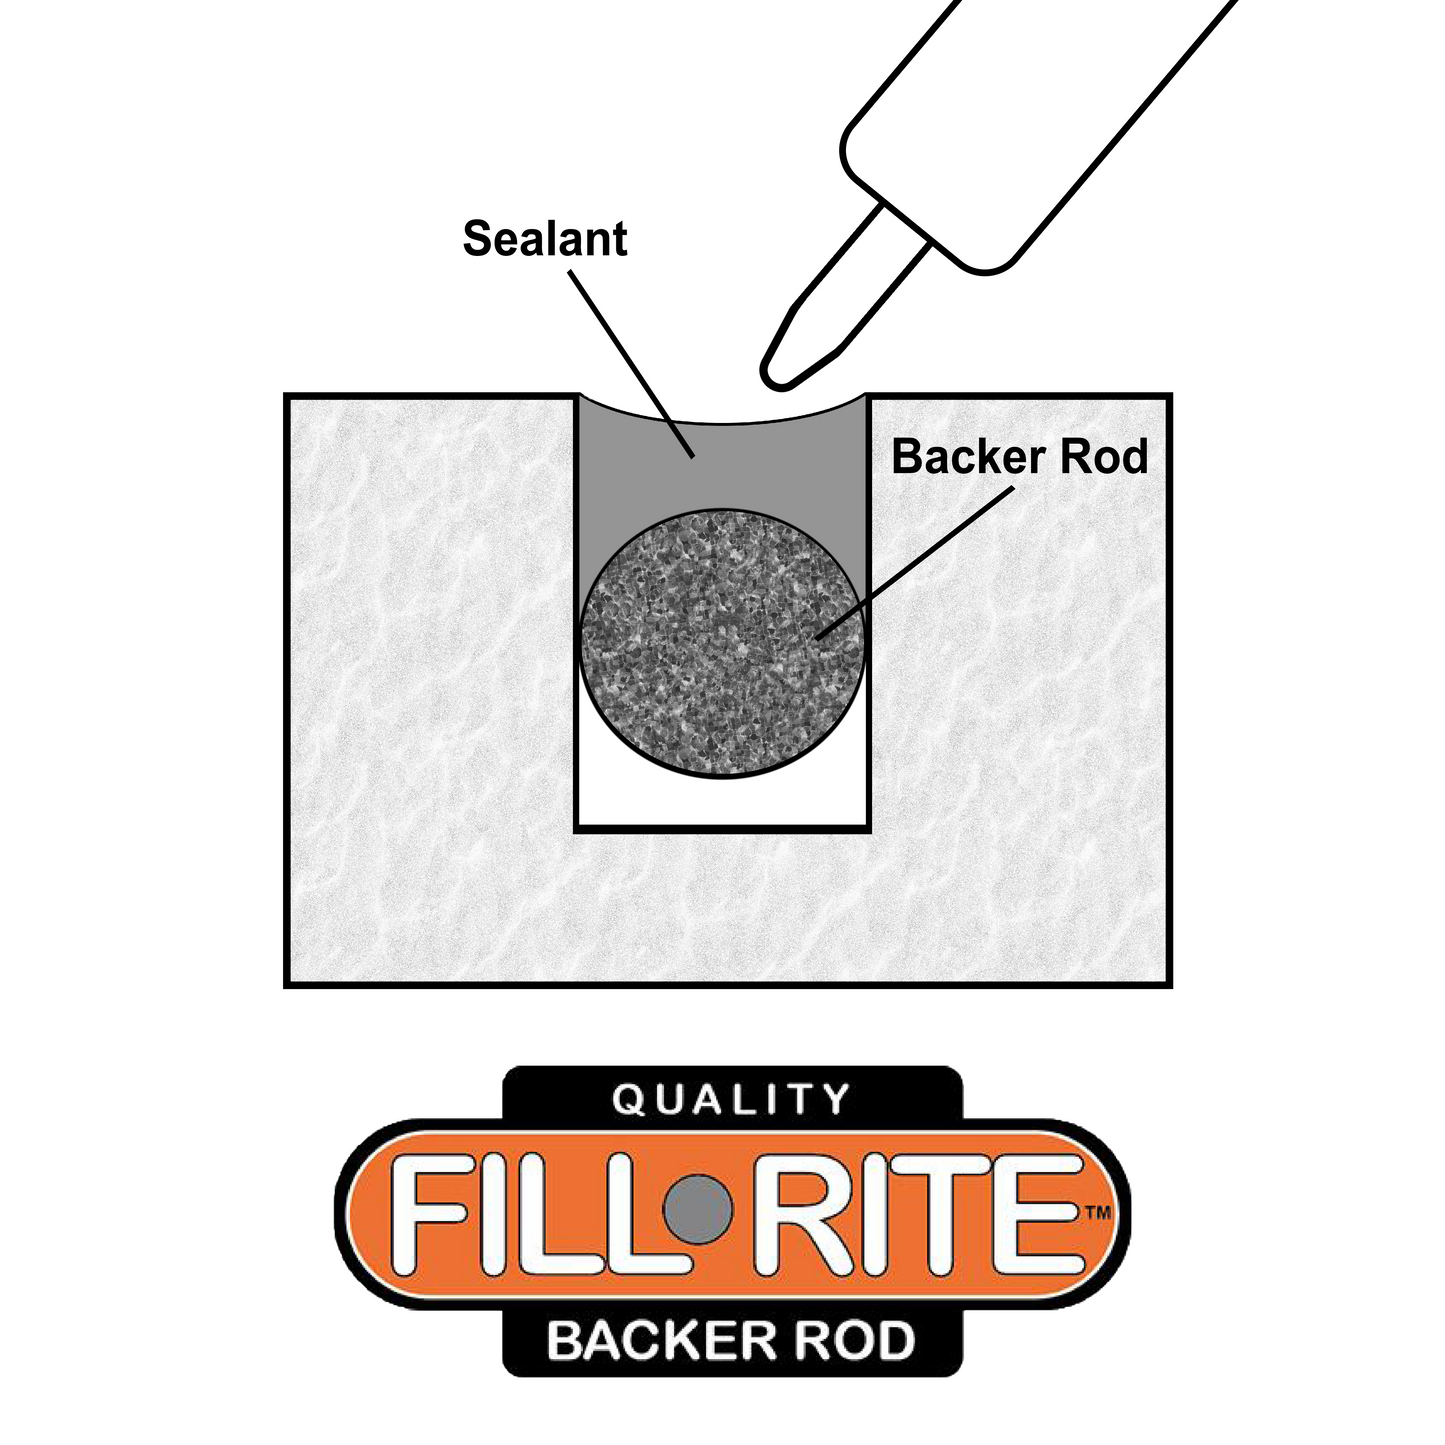 FILL-RITE 2.5 INCH Backer Rod Closed Cell (27 units of 2.5" x 72") 162 Feet - Grey